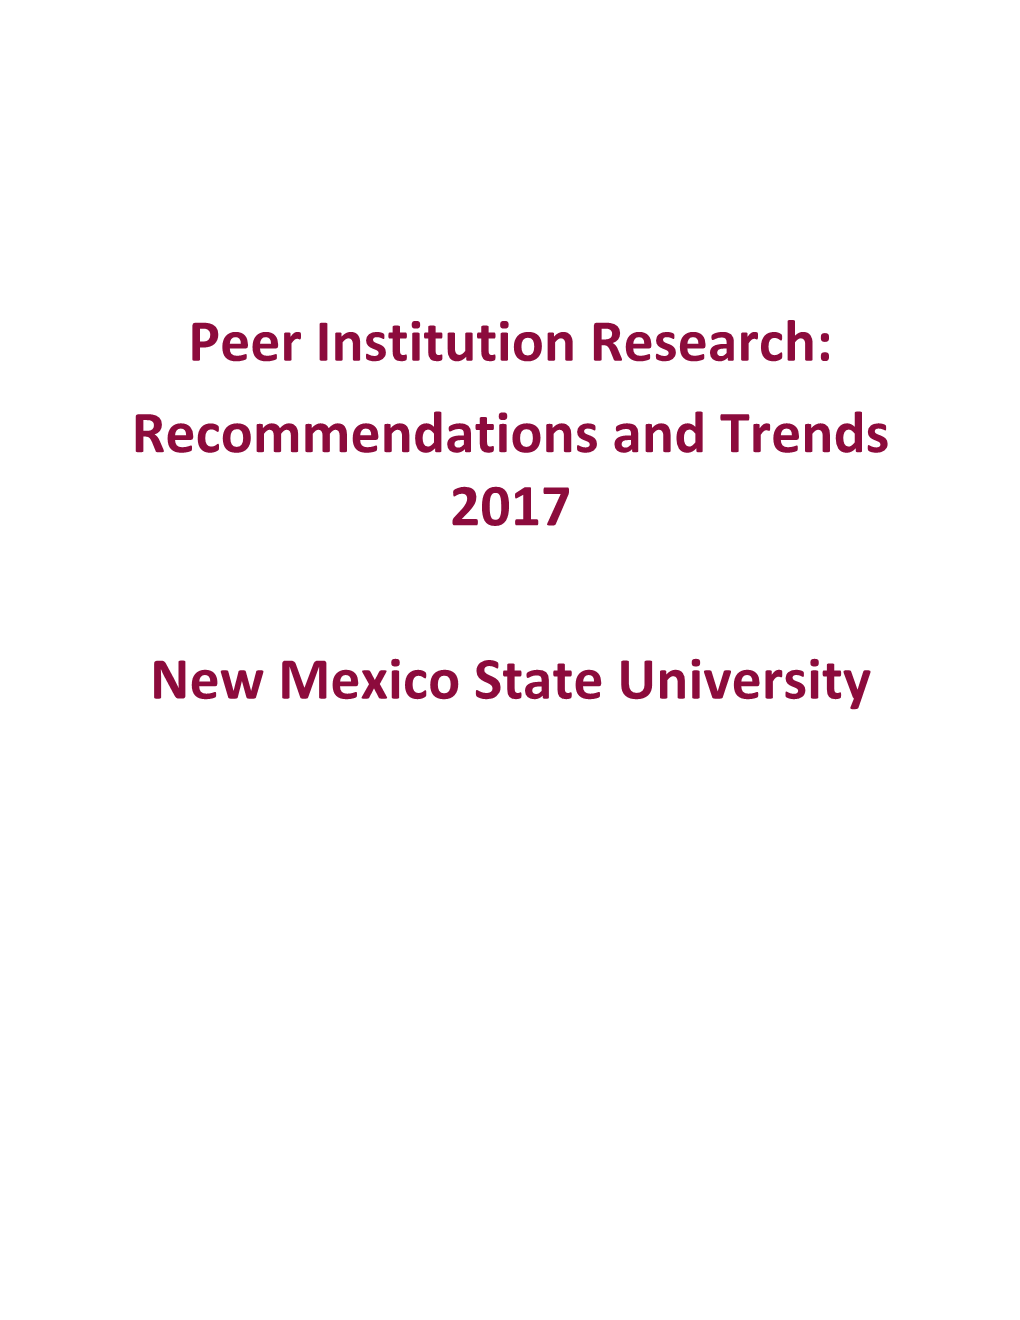 Peer Institution Research: Recommendations and Trends 2017